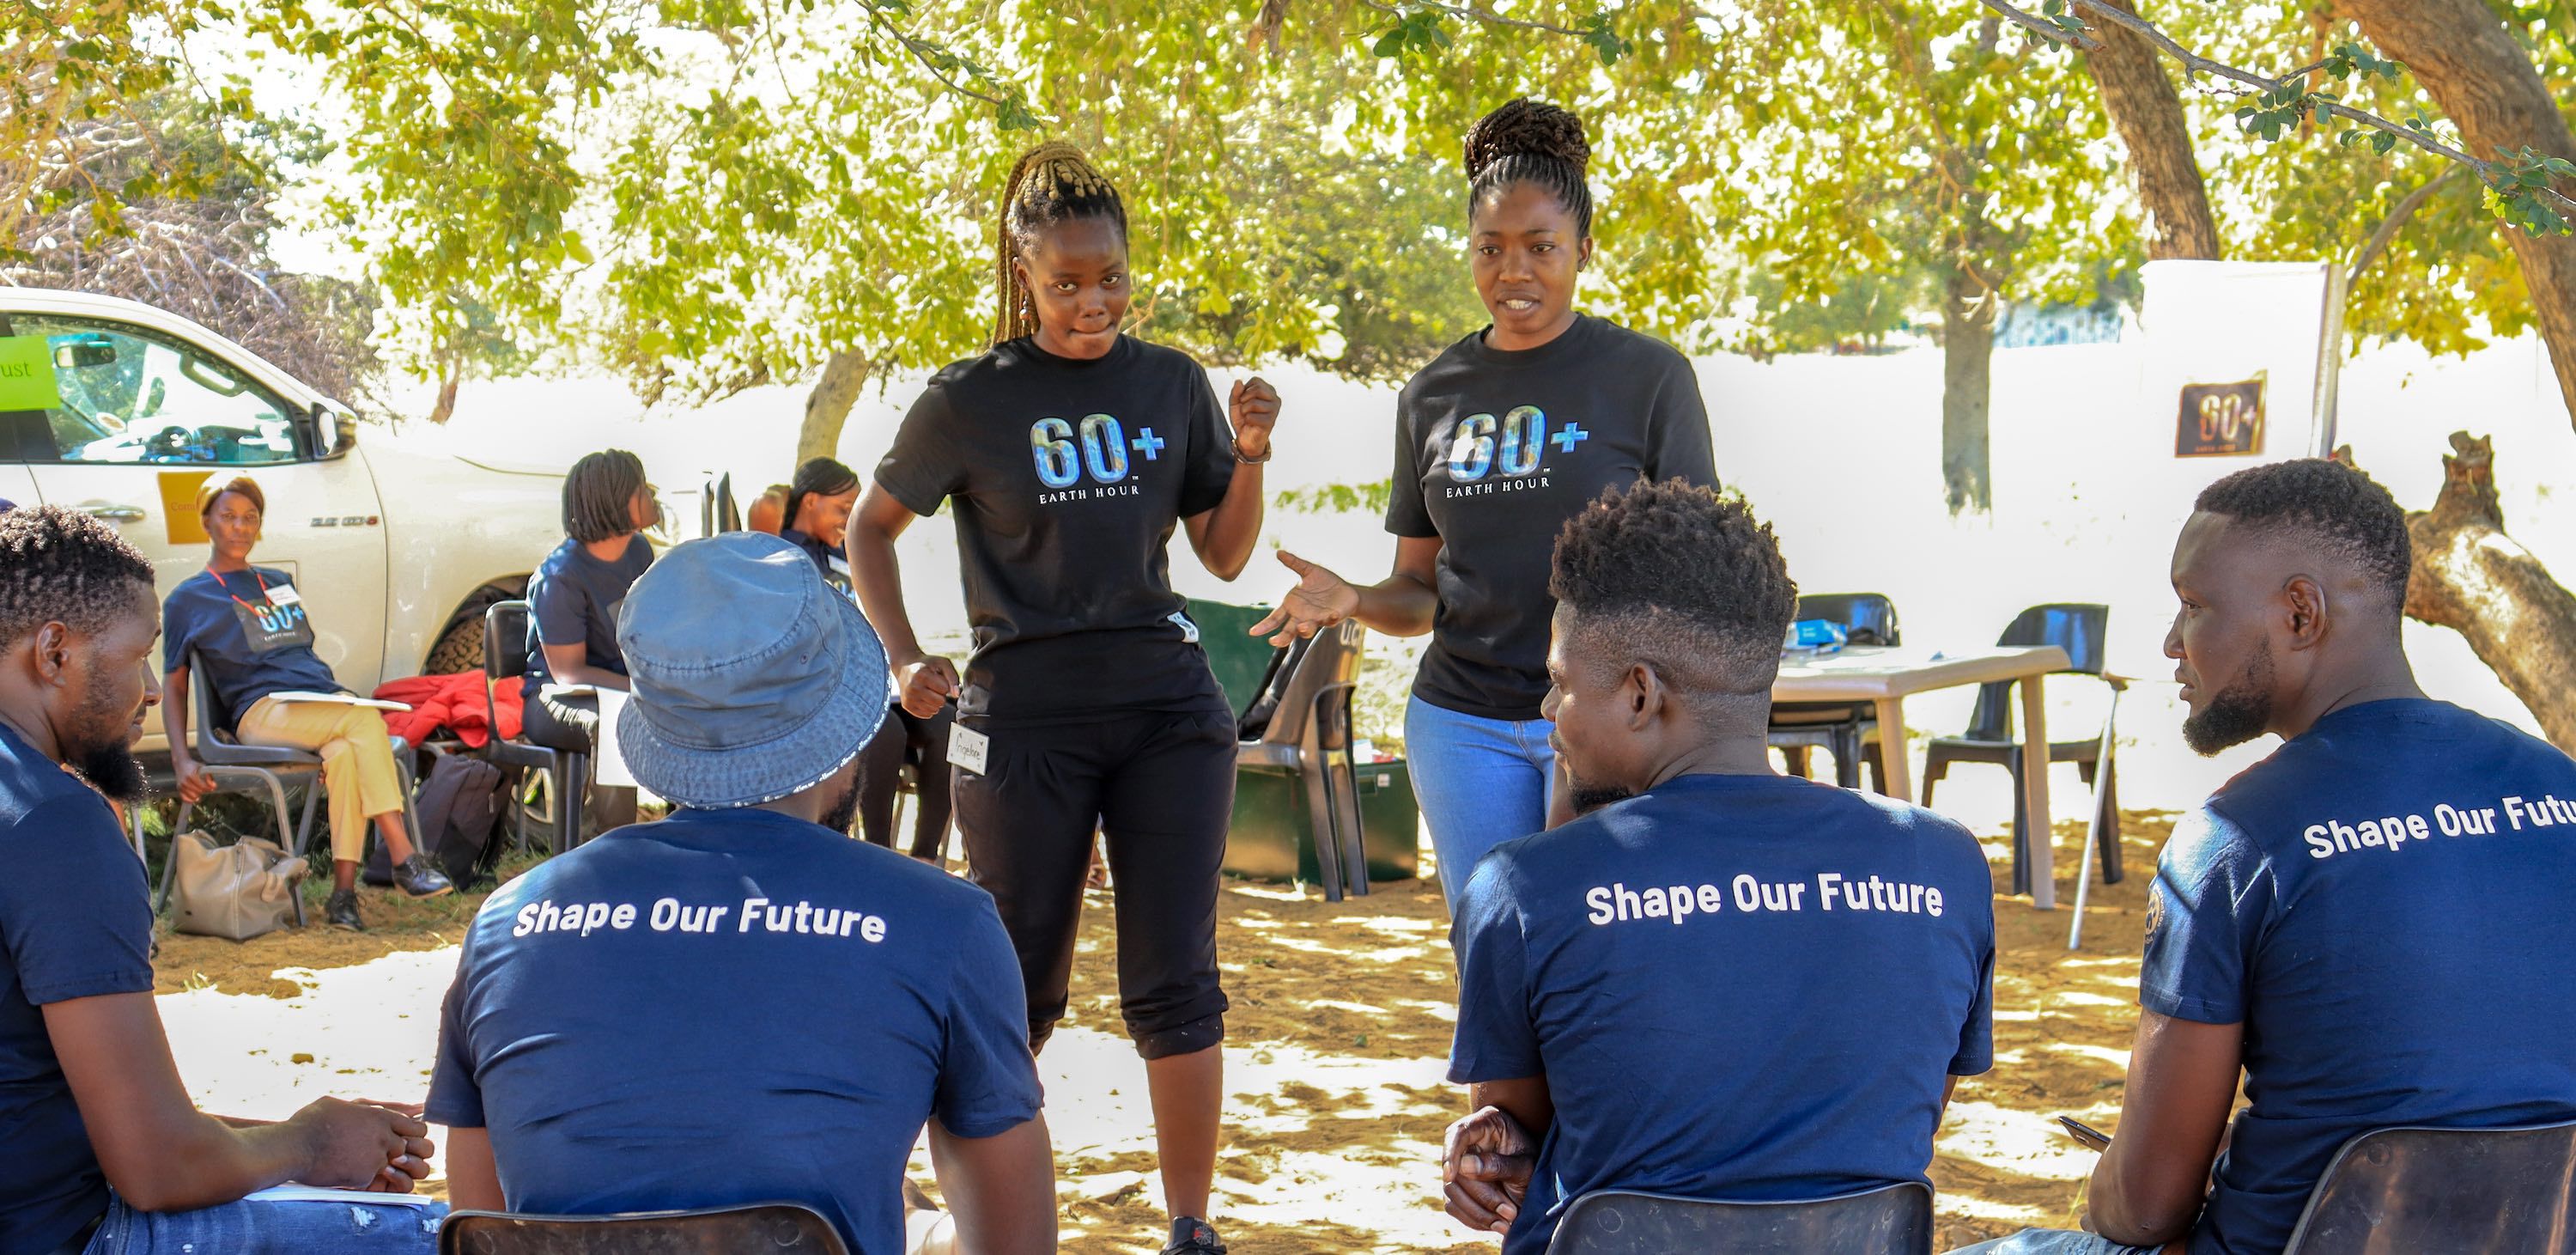 Two young women addressing a group wearing Shape Our Future t-shirts